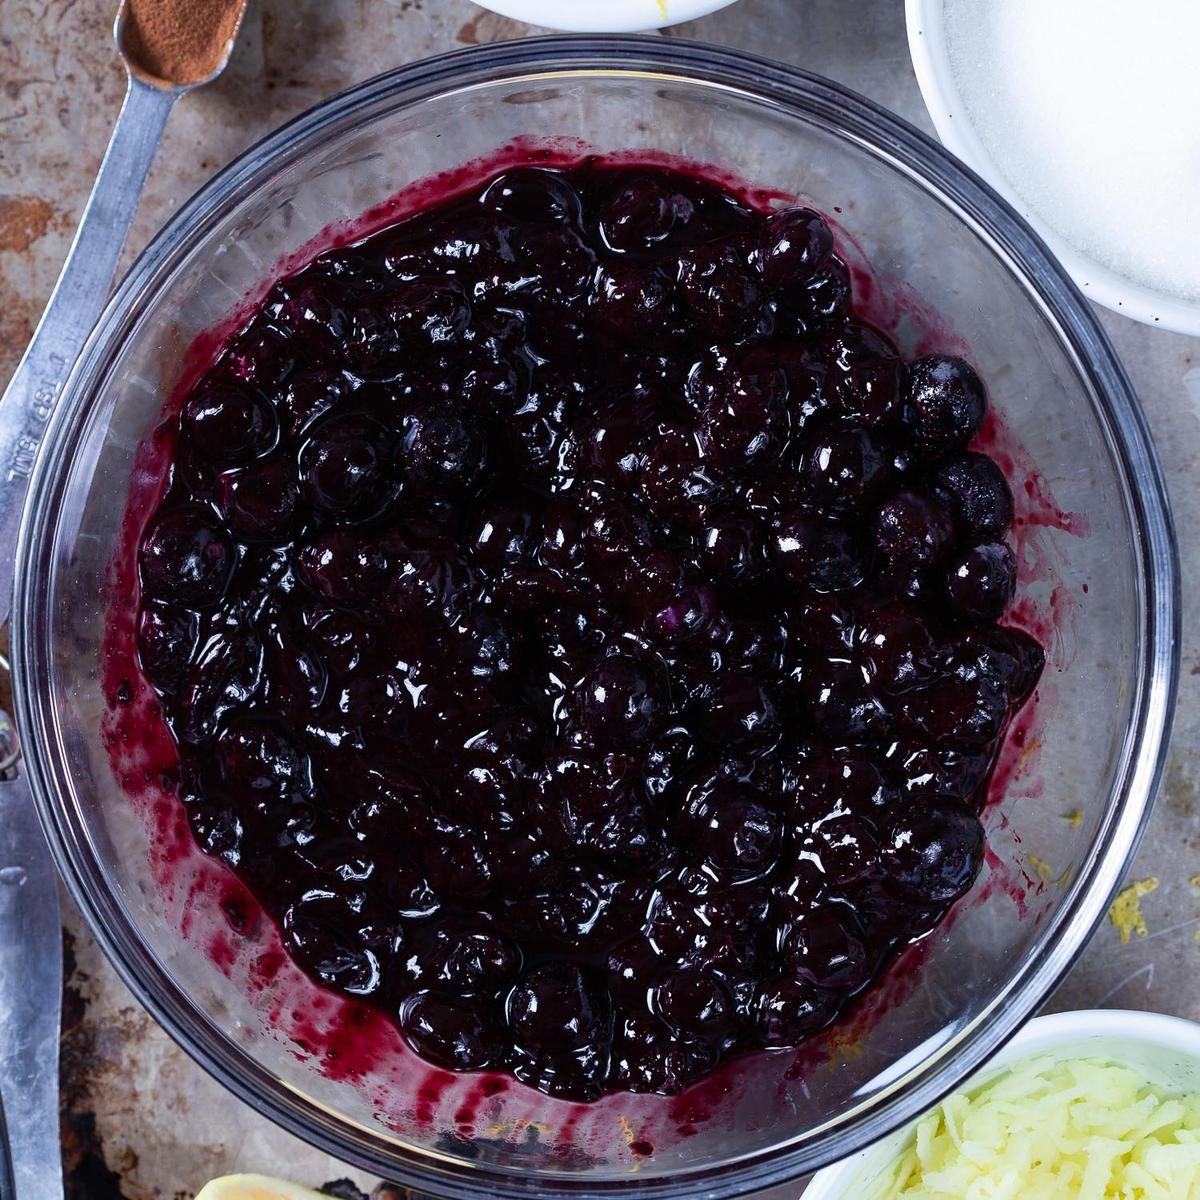 Once it’s cooked and cooled, blueberry pie filling will be thickened. (Courtesy of Amy Dong)